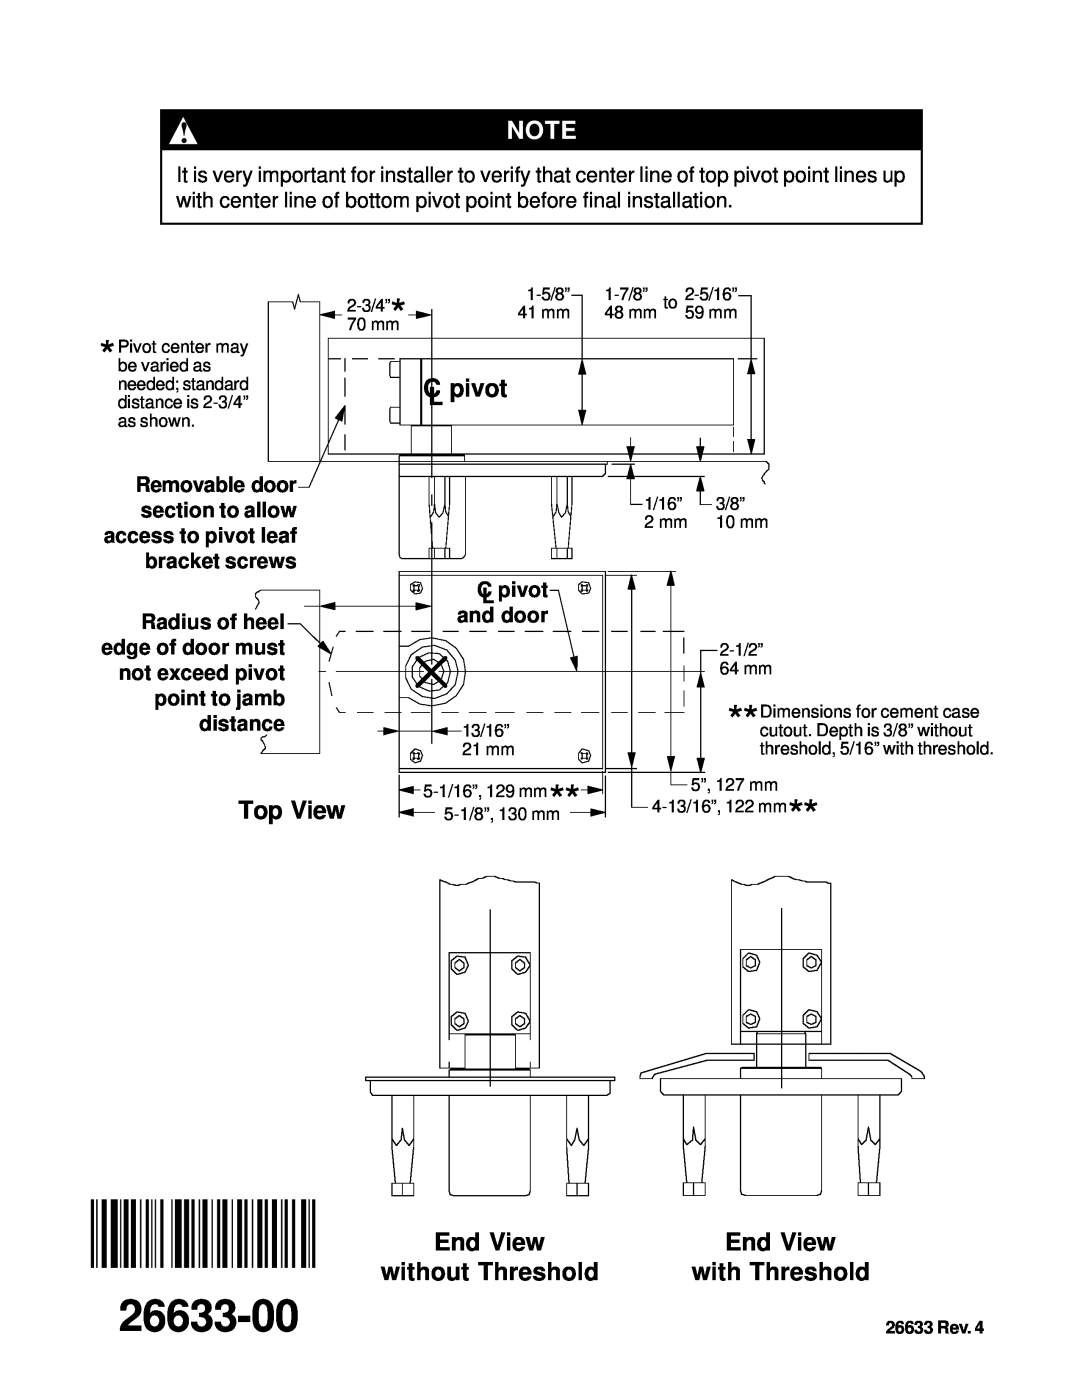 Ives 7259 installation instructions 26633-00, C pivot, Top View, End View, without Threshold, with Threshold 